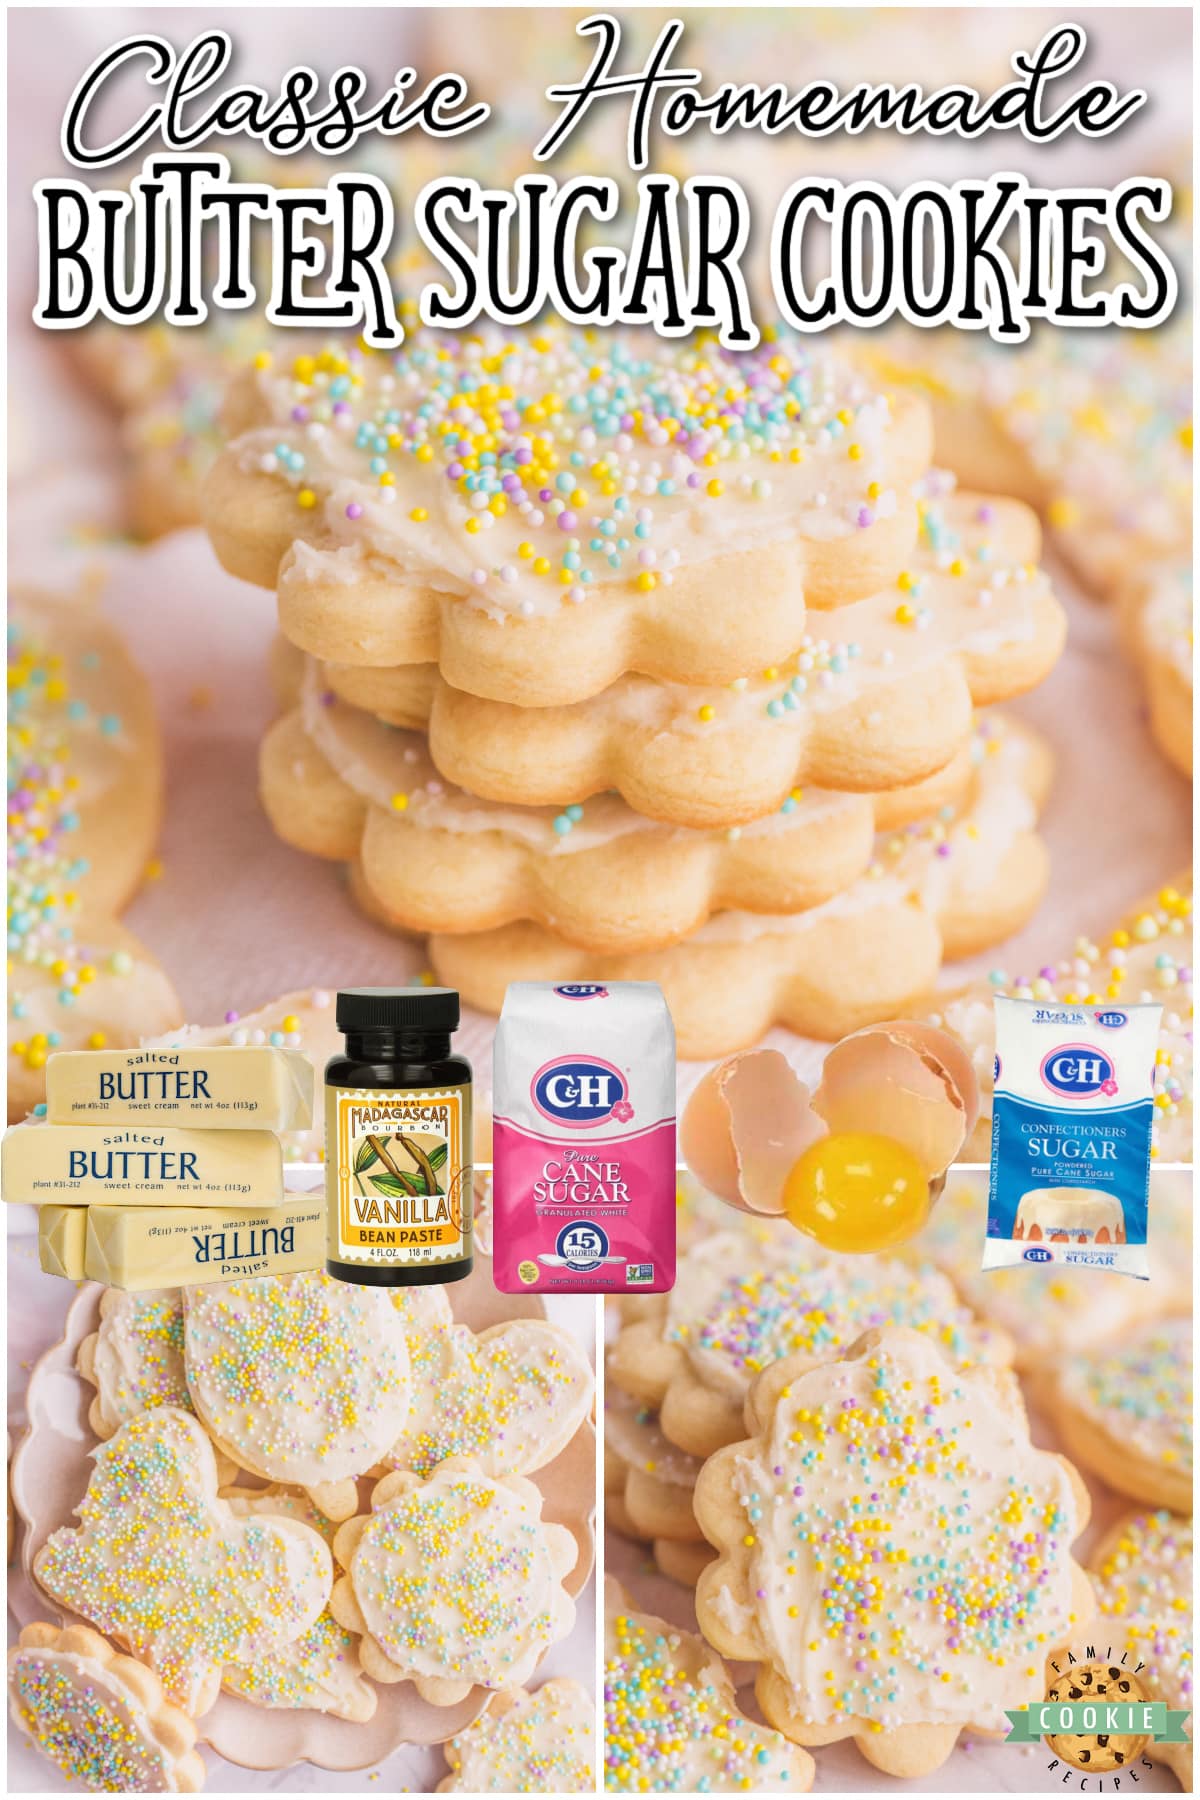 All Butter Sugar Cookies are soft & sweet cookies topped with a buttery vanilla frosting. Easy sugar cookie recipe made with simple pantry ingredients that yields about a dozen cookies.